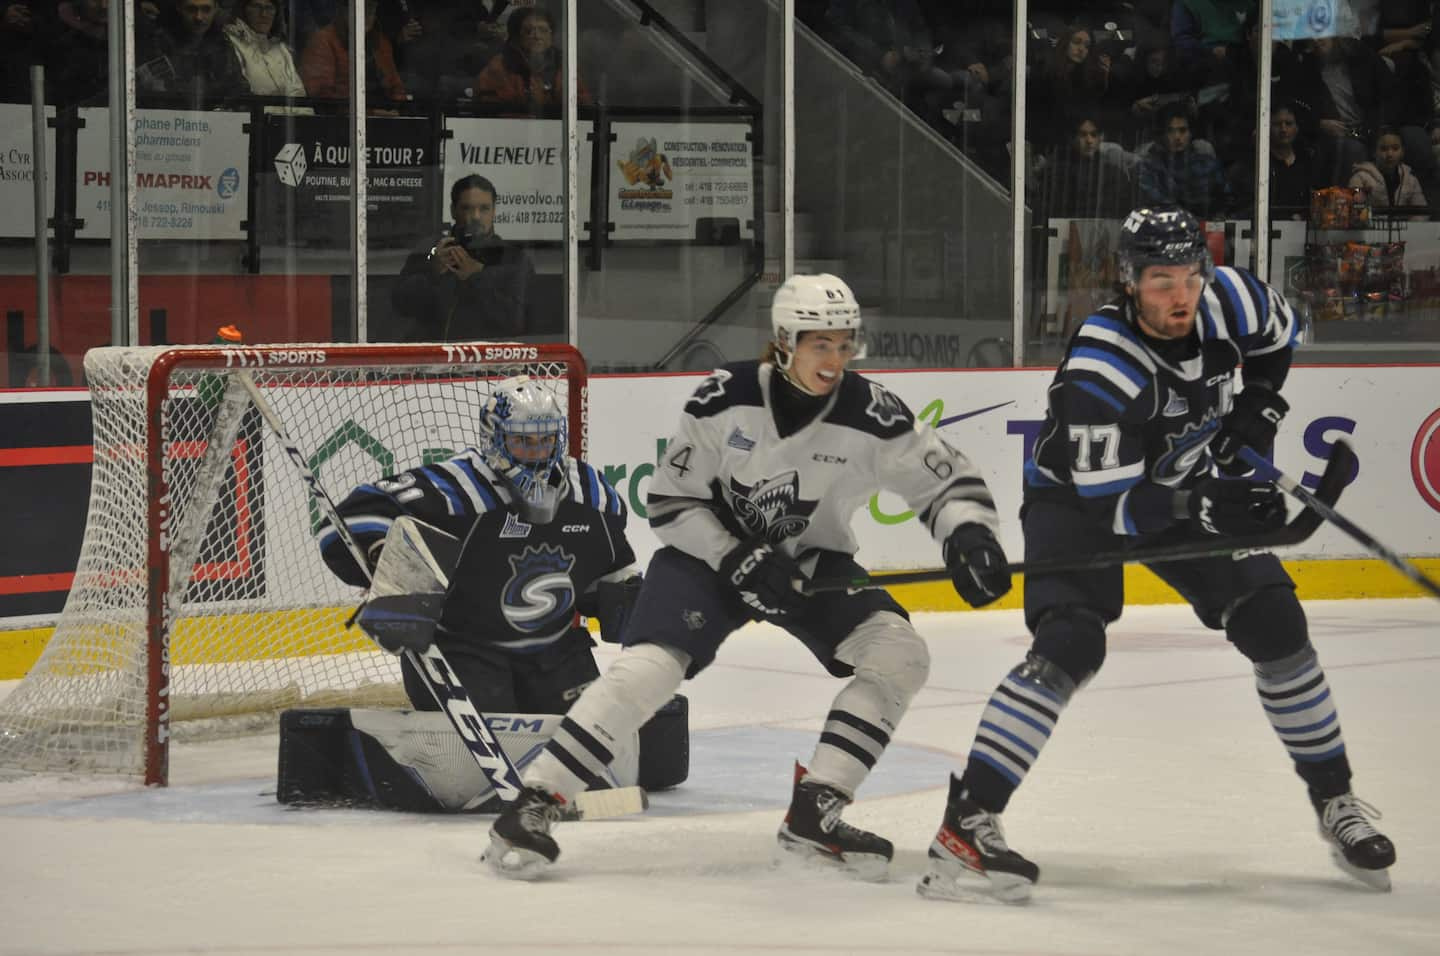 “Rimouski dominated from A to Z” according to Yannick Jean